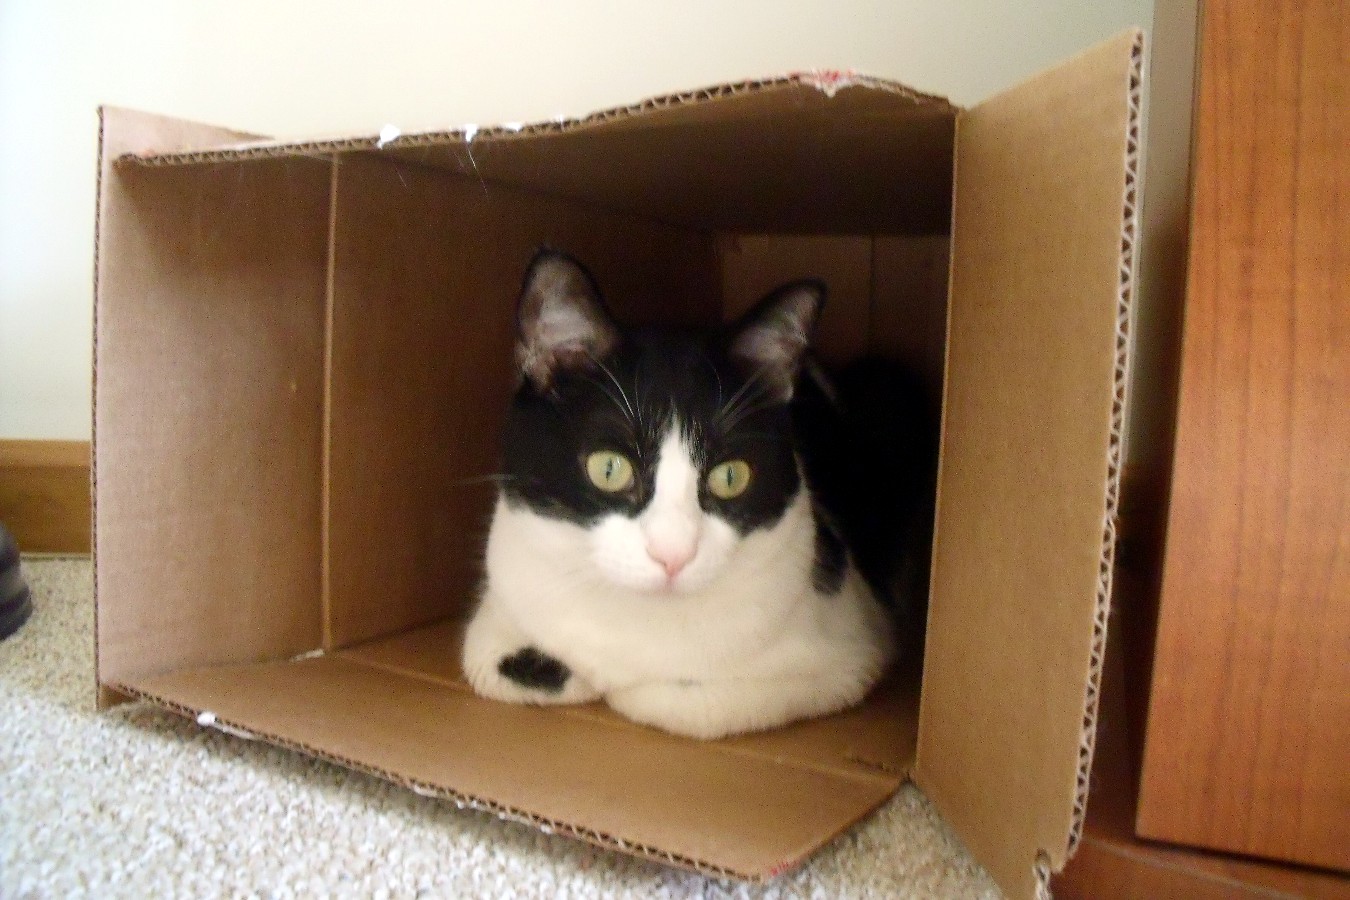 a black and white cat is sitting inside a cardboard box